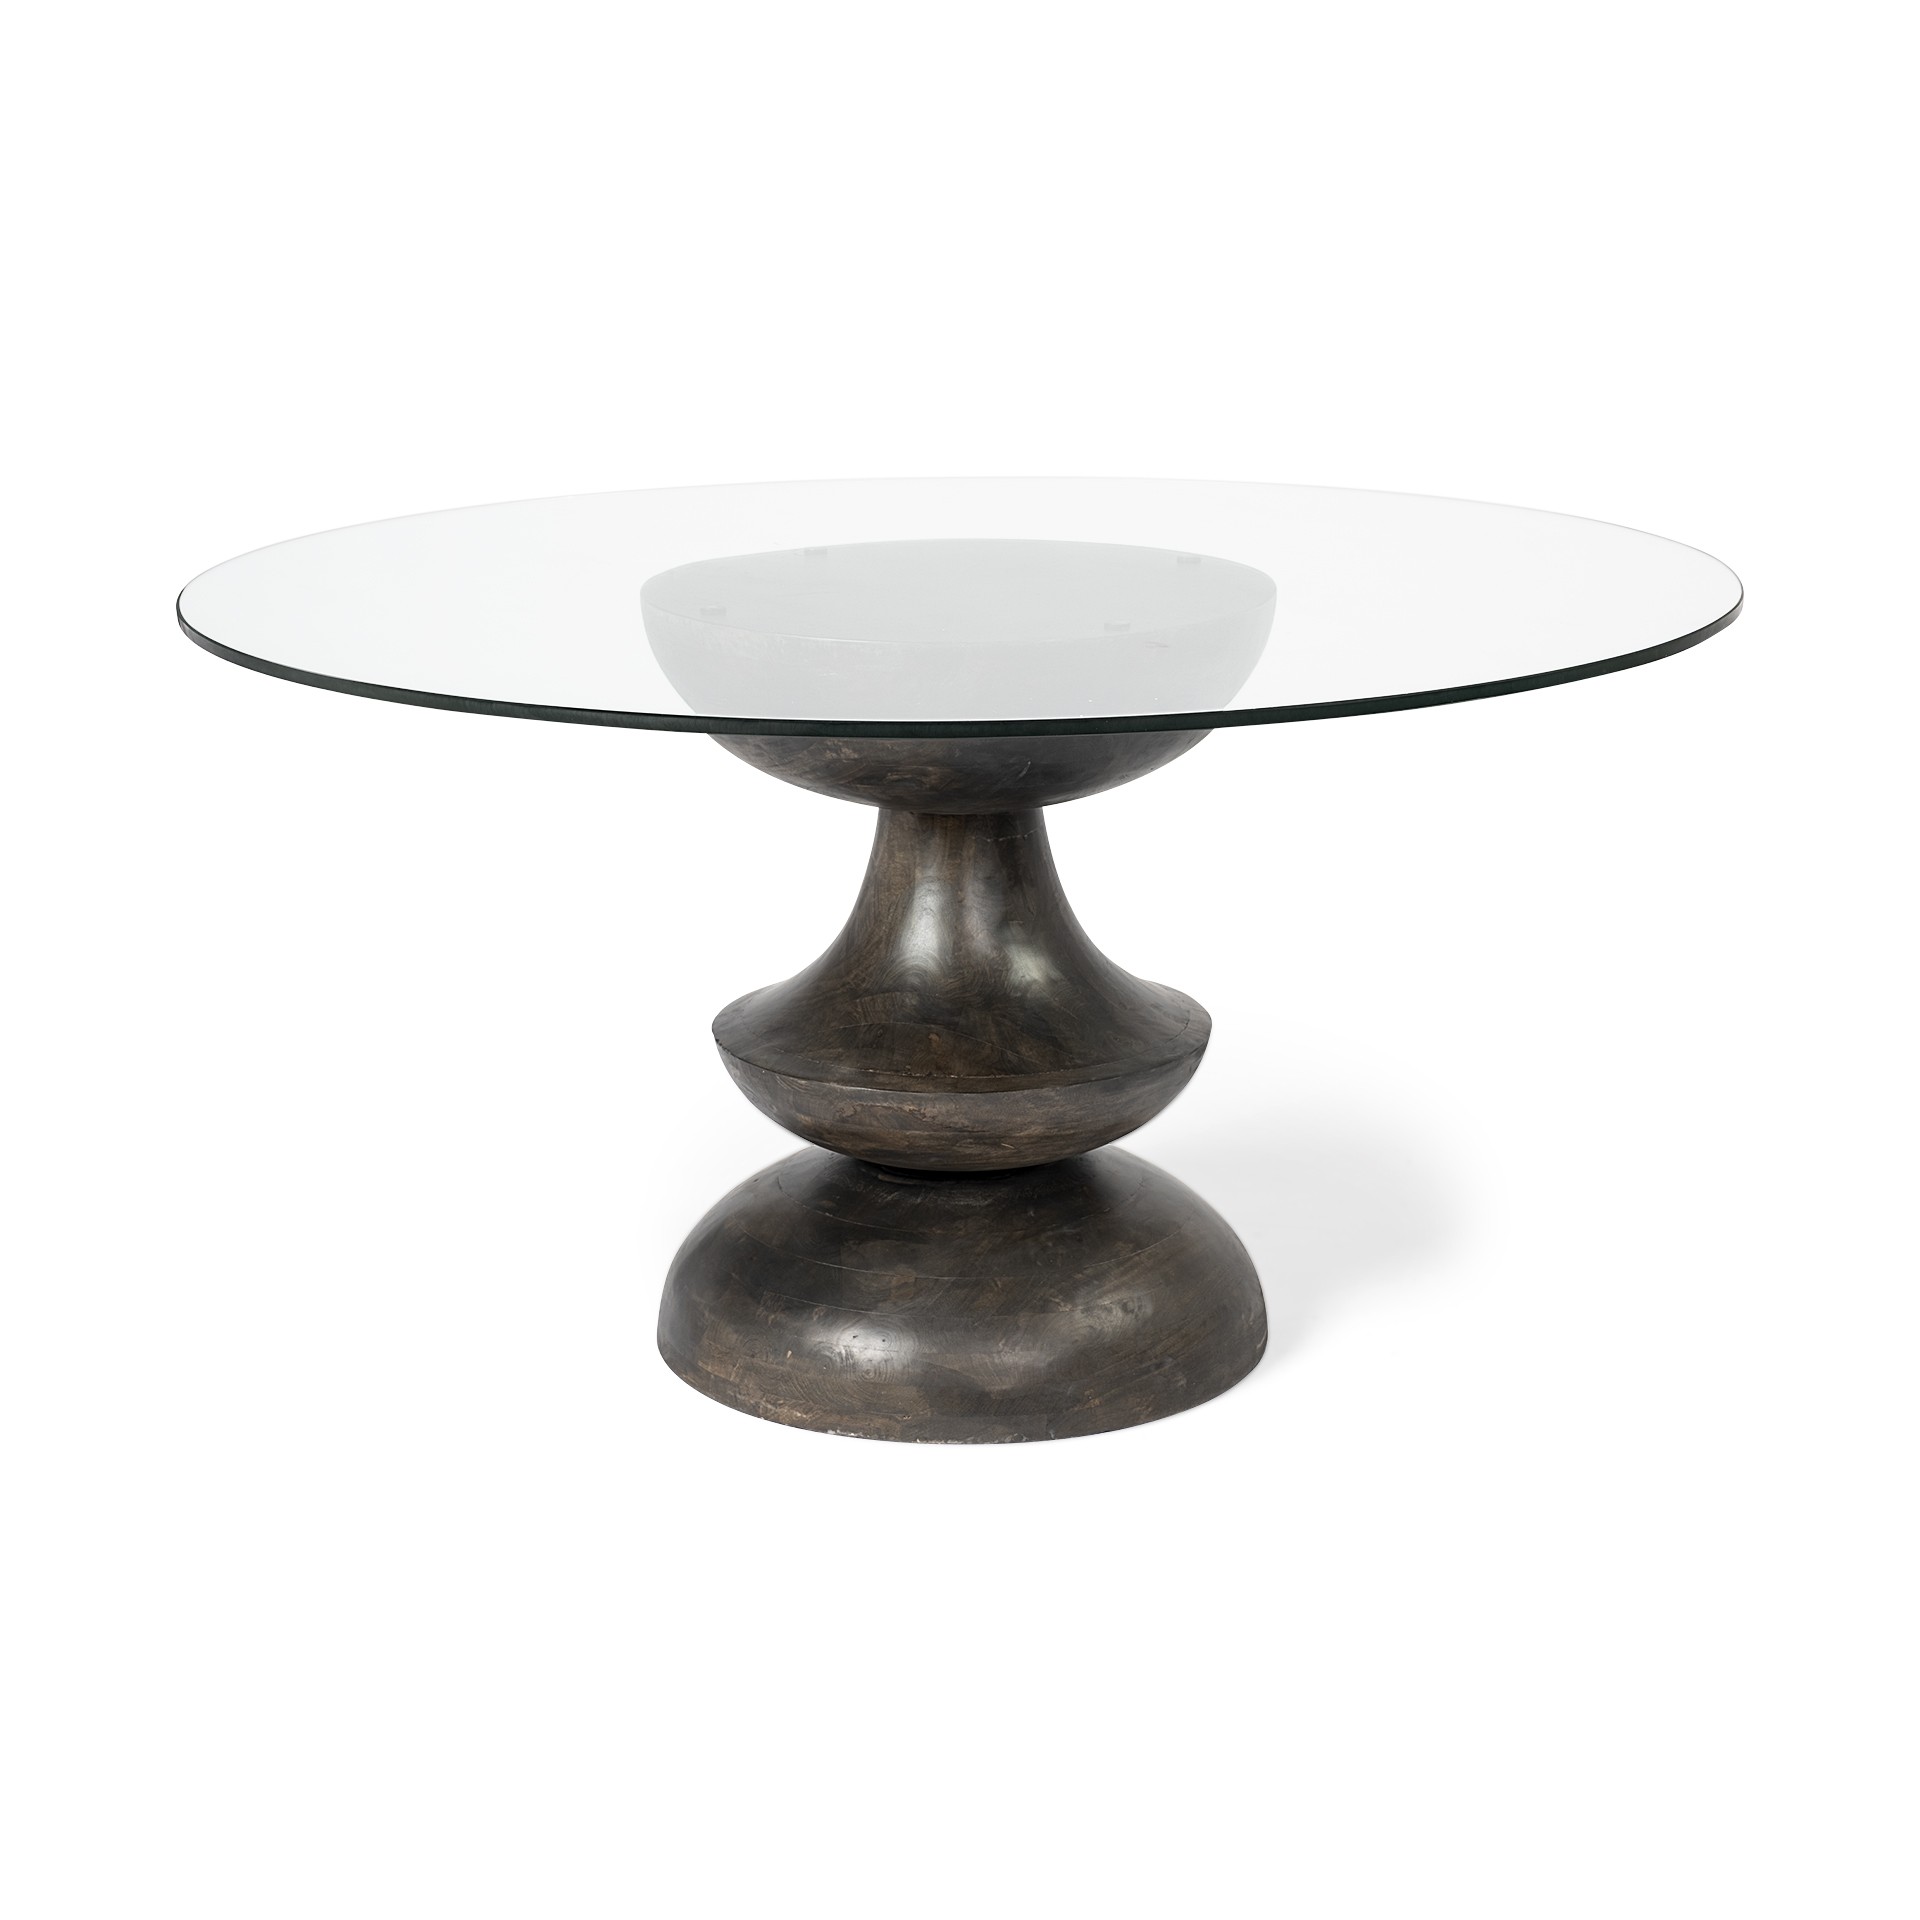 60" Round Glass Top Brown Wood with Pedestal Base Dining Table